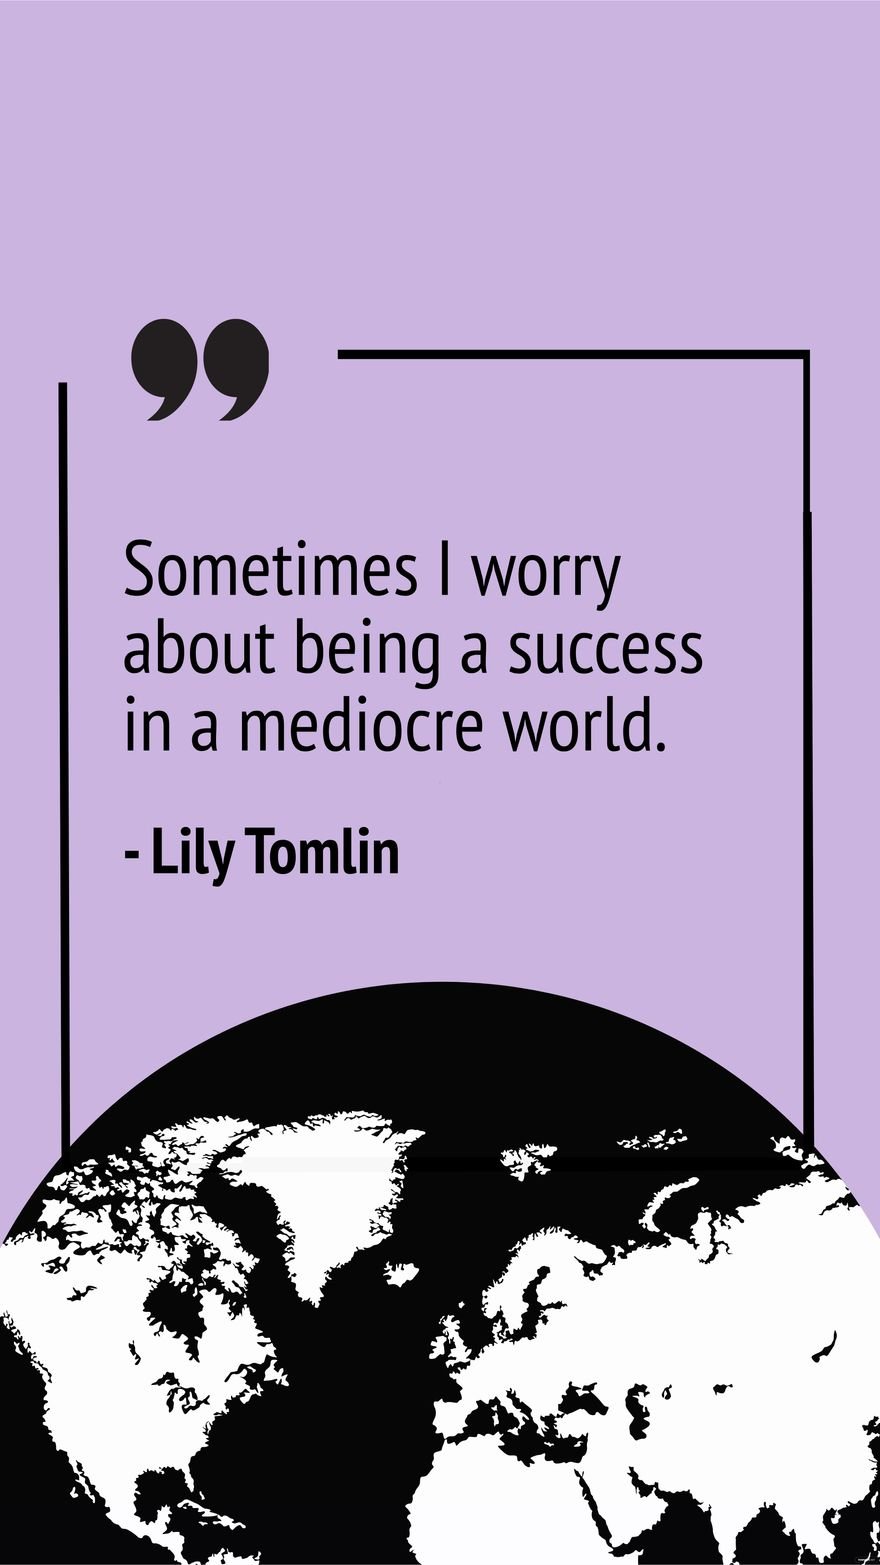 Lily Tomlin - Sometimes I worry about being a success in a mediocre world.